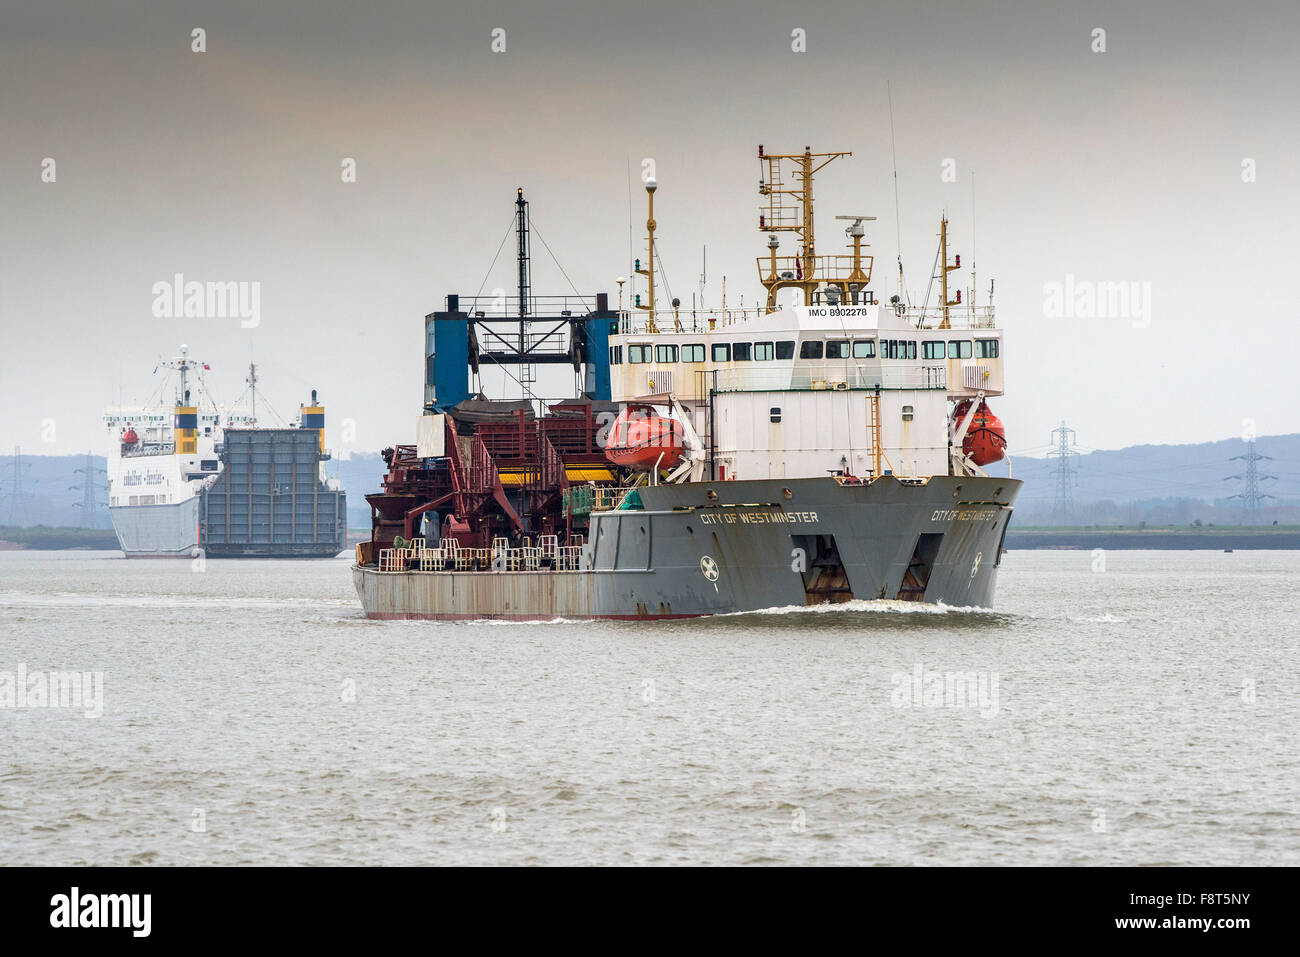 The dredger City of Westminster passes an outward bound Cobelfret Ferry as she steams upriver on the River Thames. Stock Photo